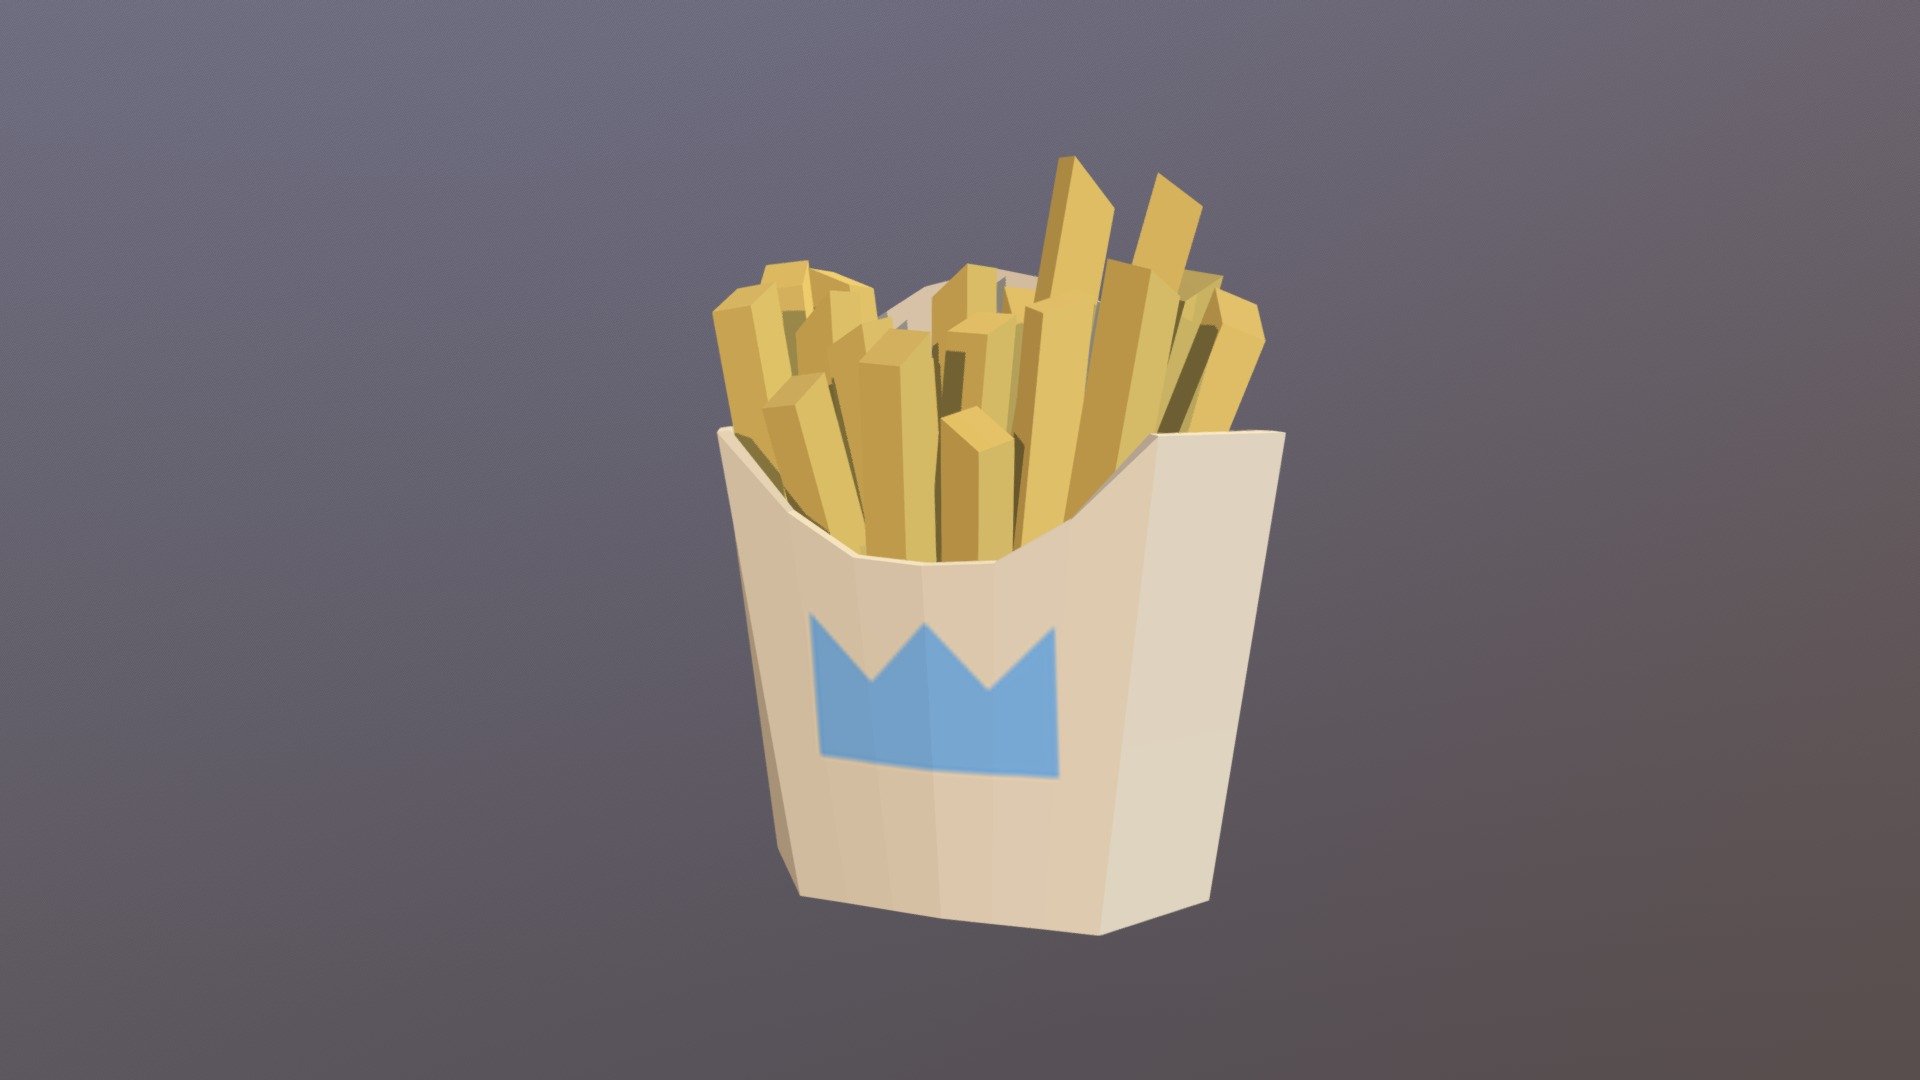 A simple model of chips from a fast food restaurant that I tried to get myself back into modelling again :) - Fast Food Chips - 3D model by Shenquarh 3d model